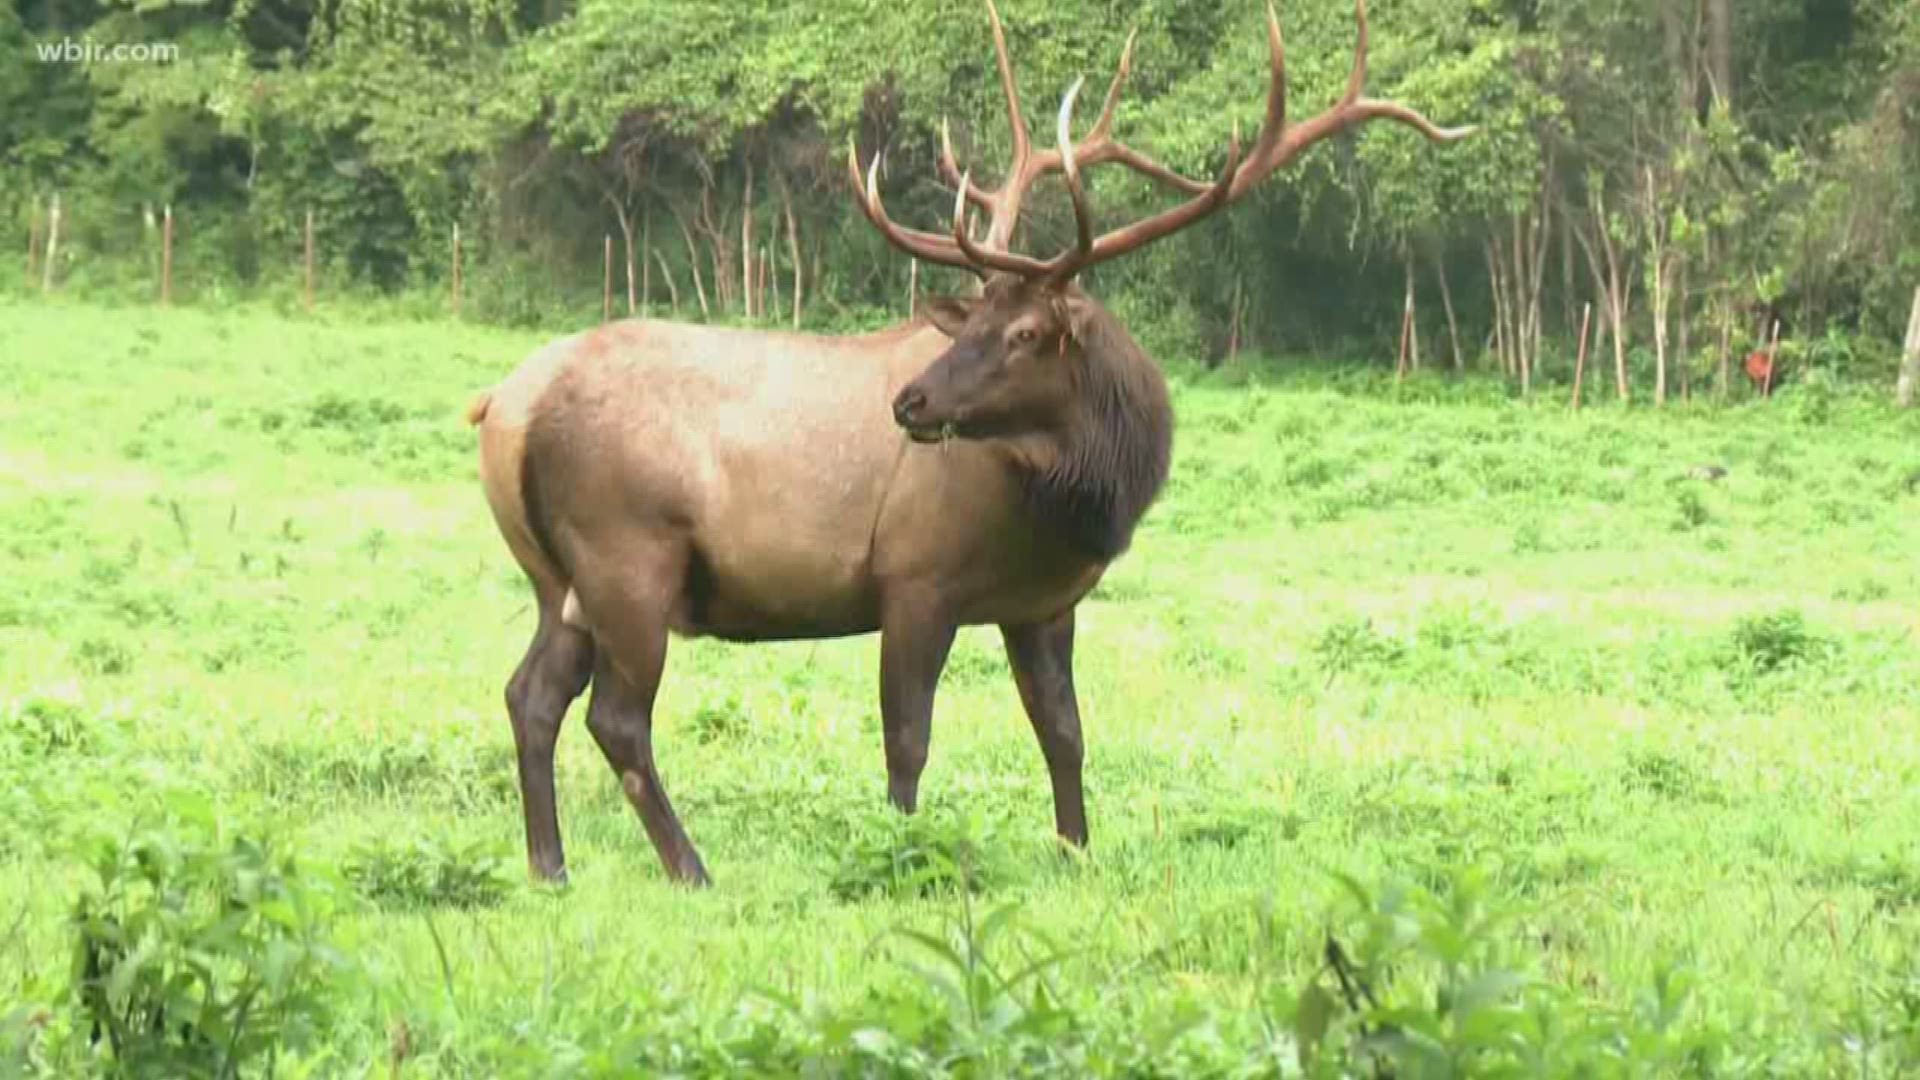 May 31, 2018: Elk from the North Carolina herd have been spotted in the Tennessee side of the Great Smoky Mountains. What makes this sighting unique is the elk took the highest road possible across Newfound Gap.